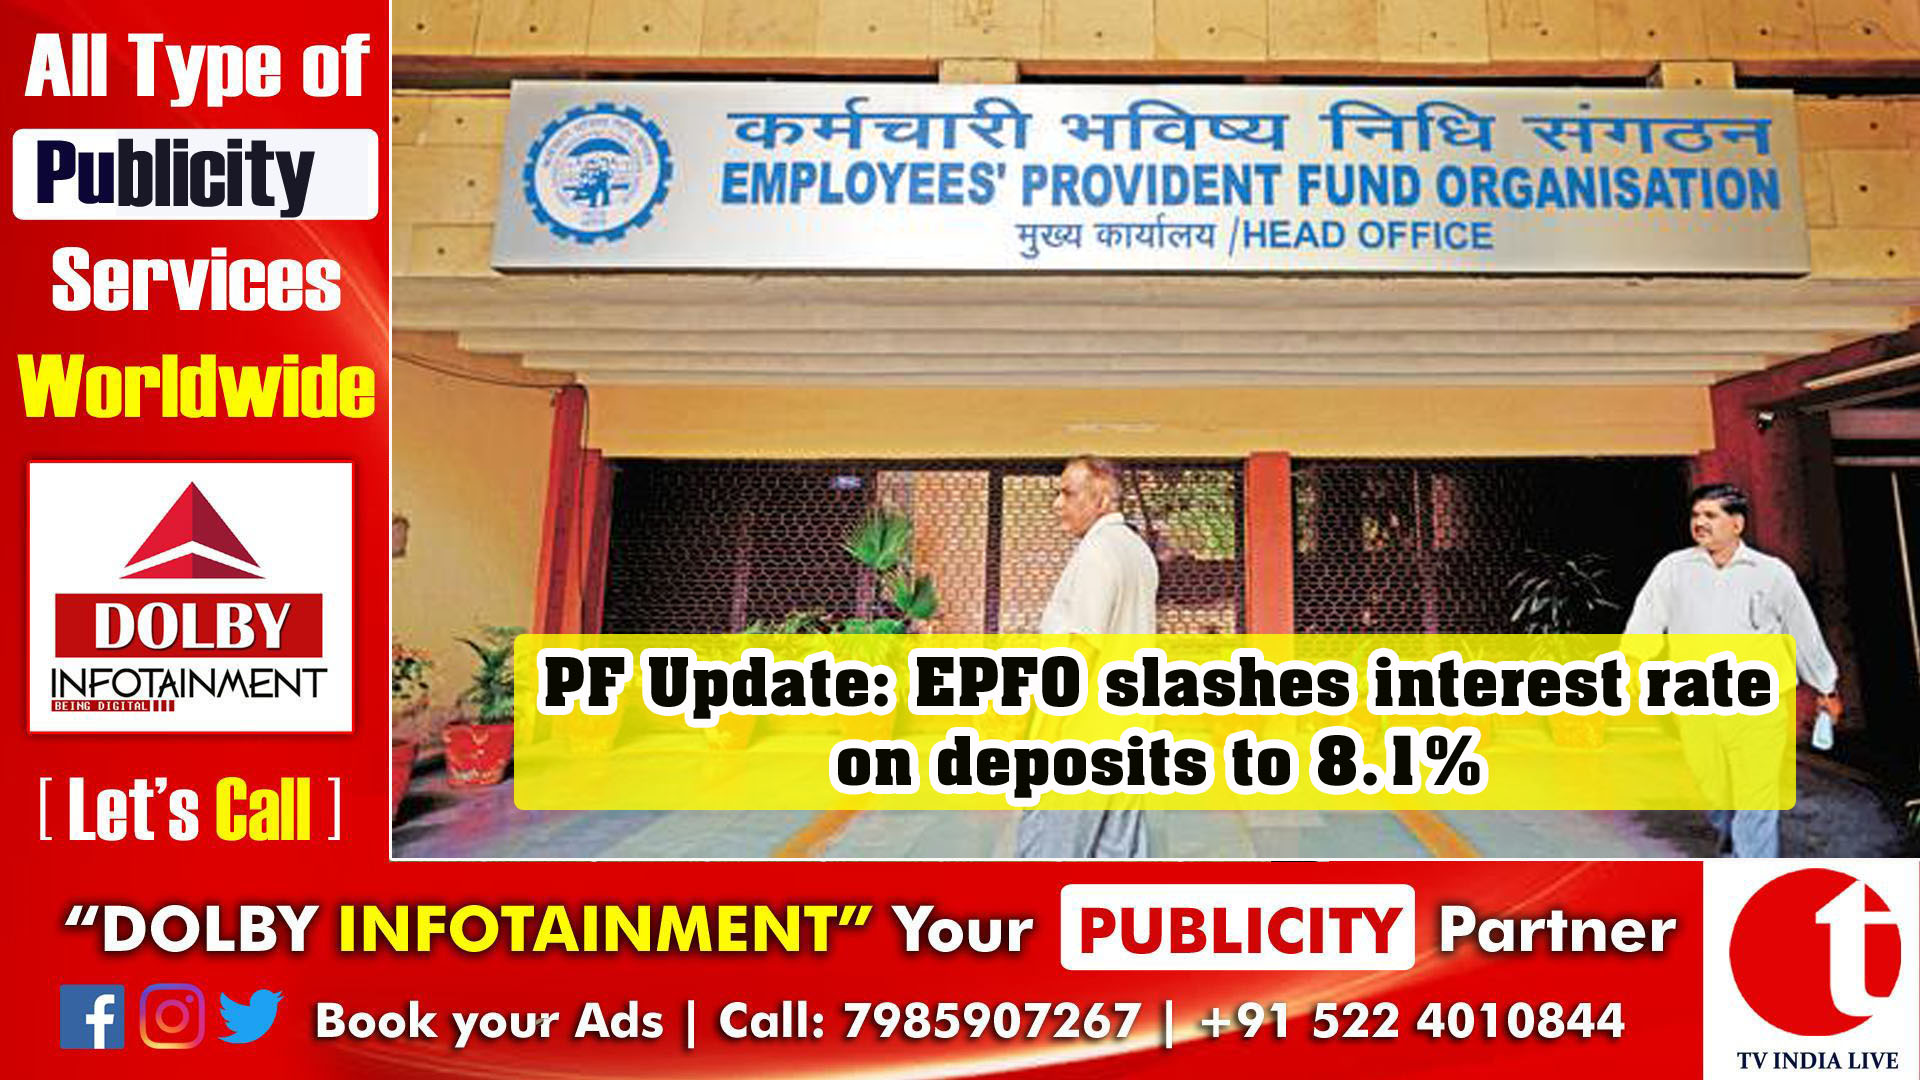 PF Update: EPFO slashes interest rate on deposits to 8.1%